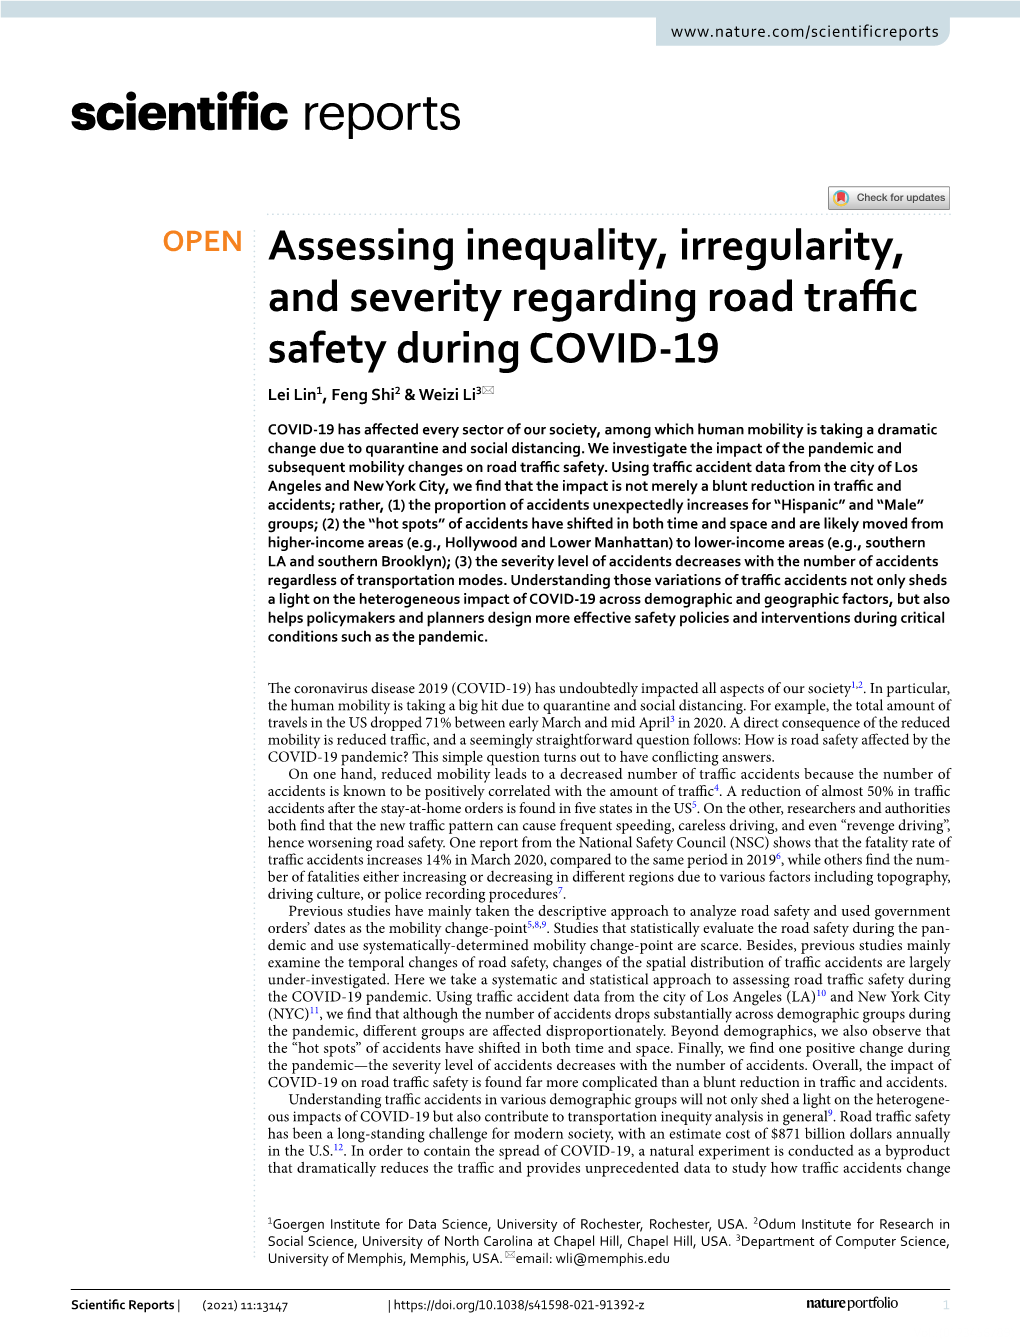 Assessing Inequality, Irregularity, and Severity Regarding Road Traffic Safety